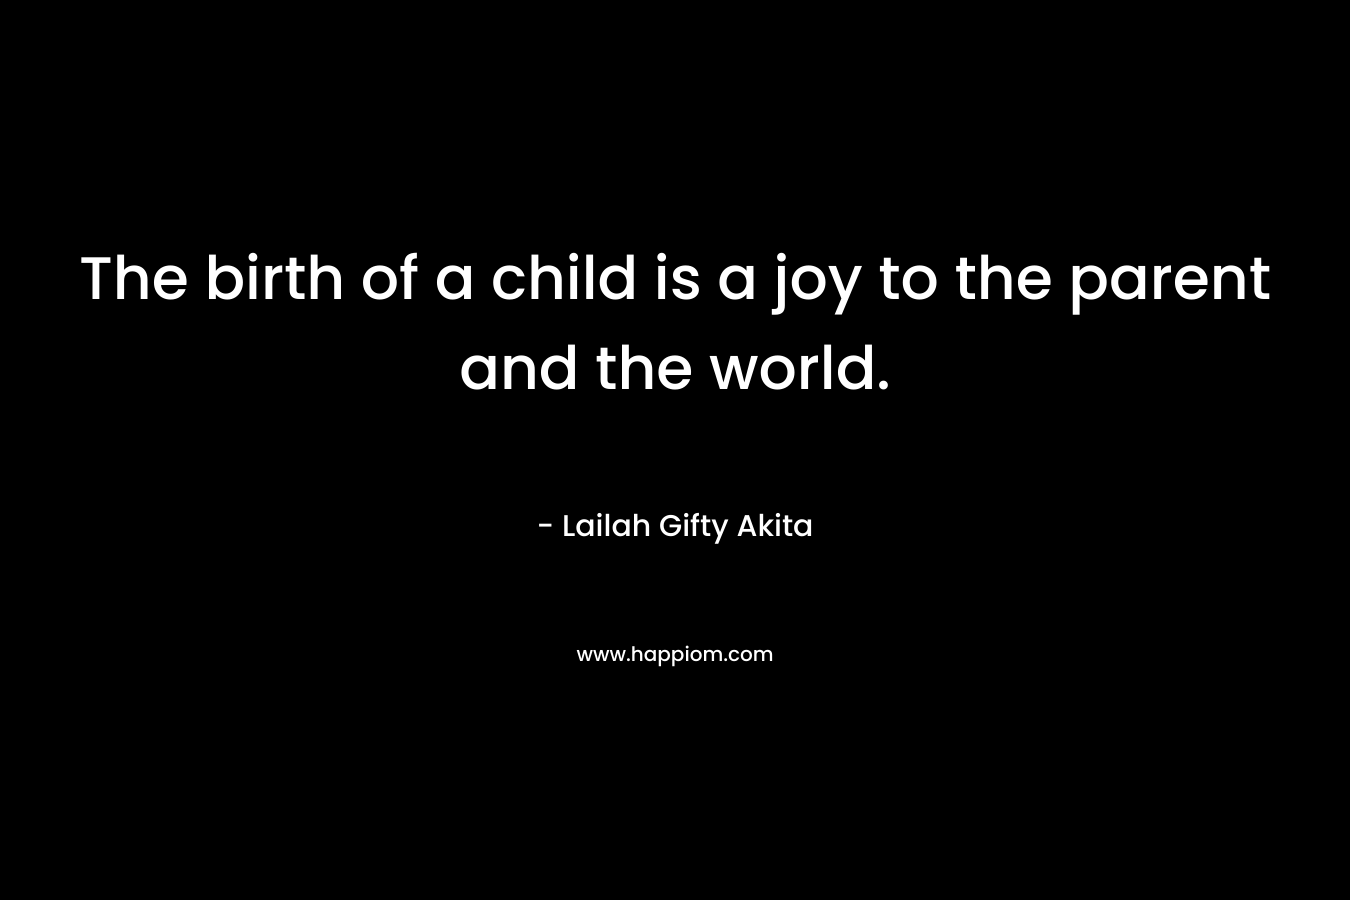 The birth of a child is a joy to the parent and the world.